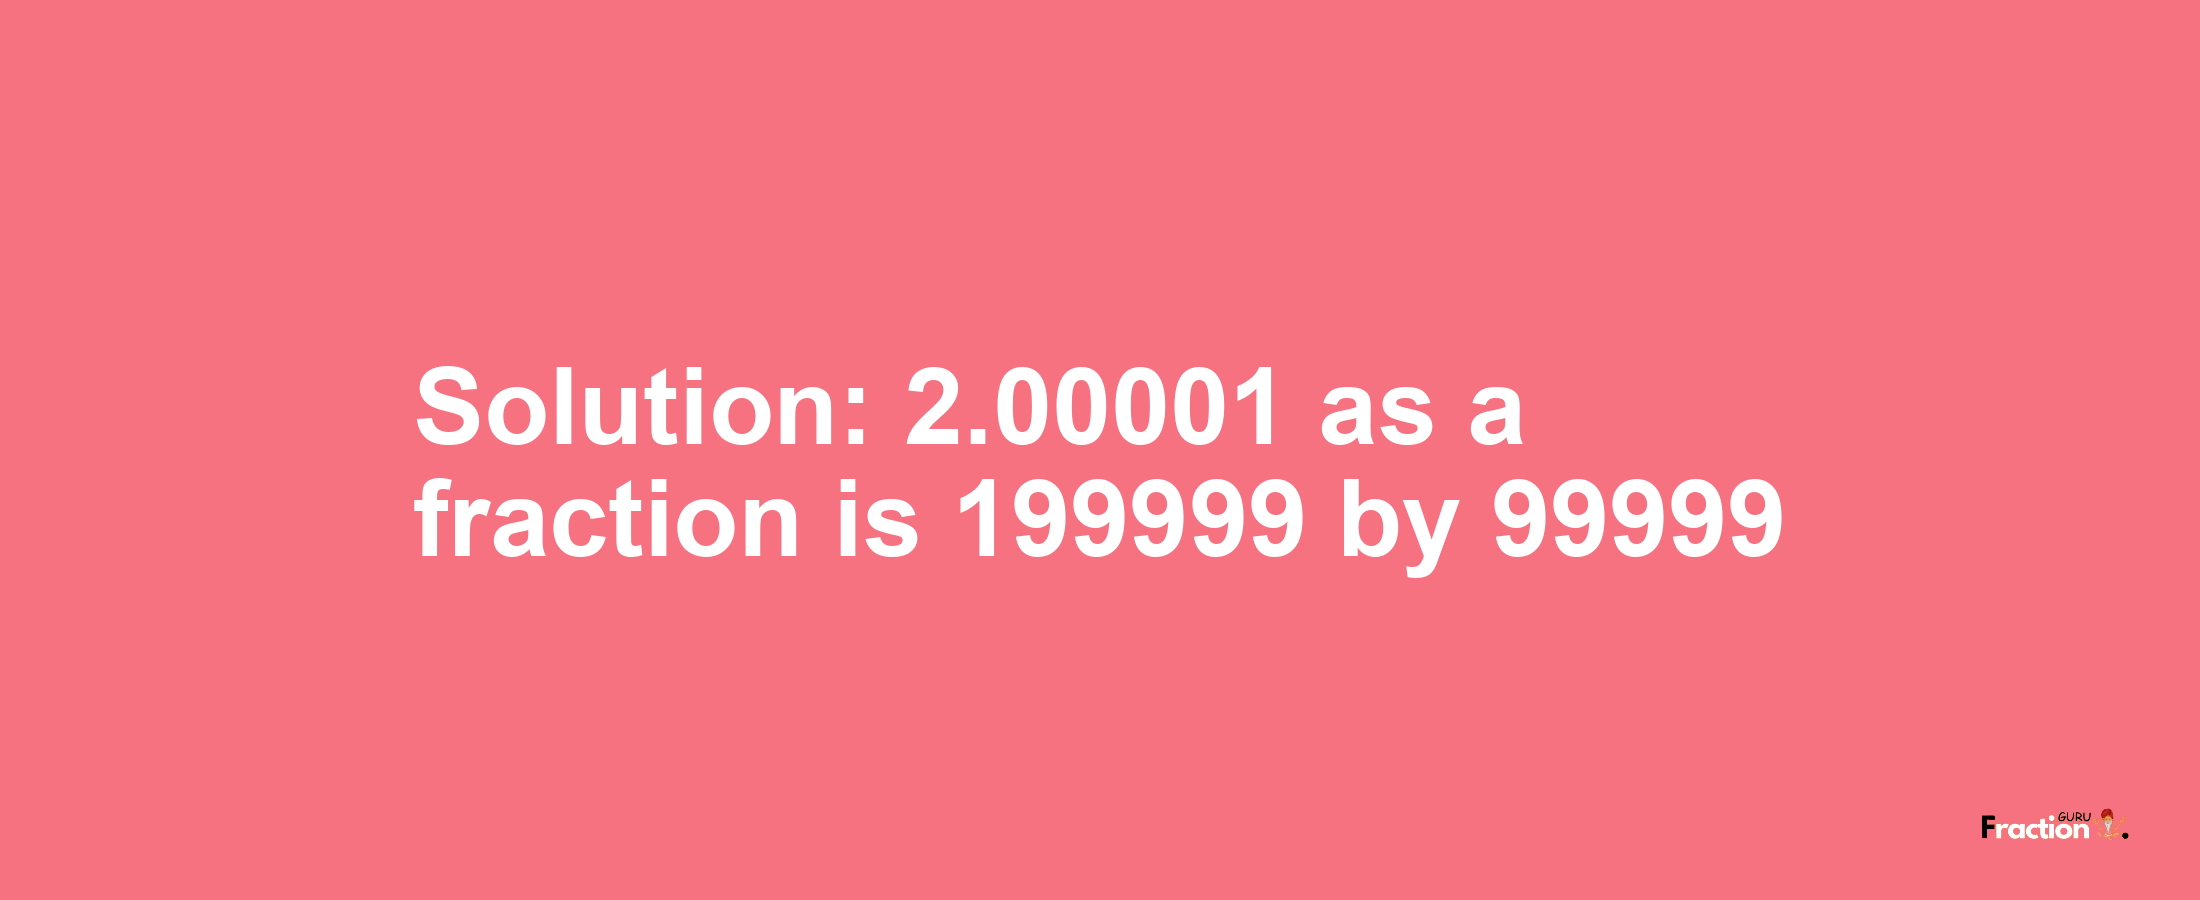 Solution:2.00001 as a fraction is 199999/99999